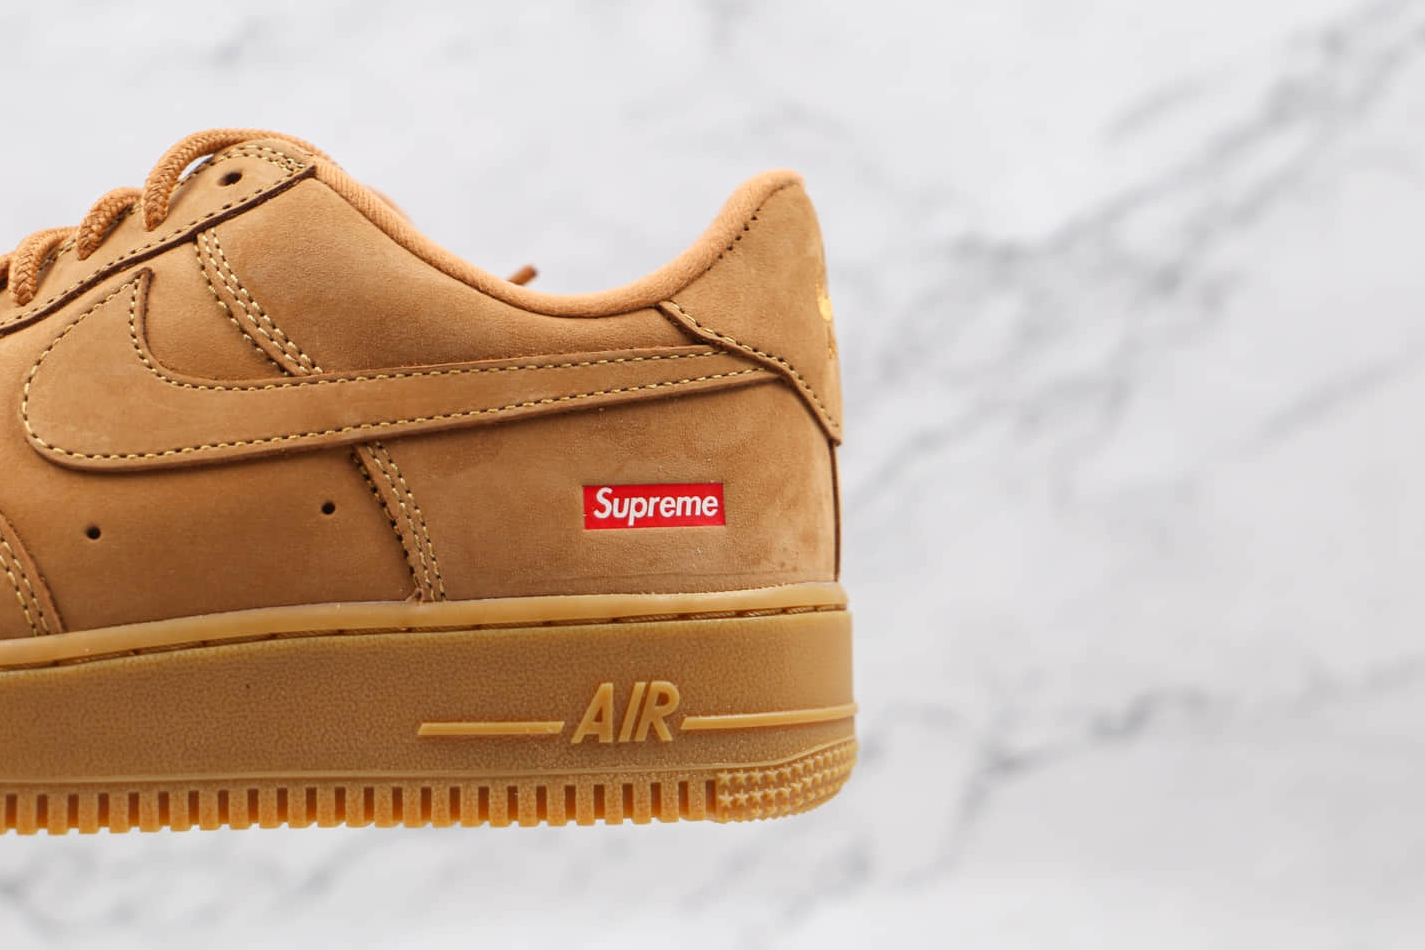 Nike Supreme x Air Force 1 Low SP 'Wheat' DN1555-200 - Shop Now